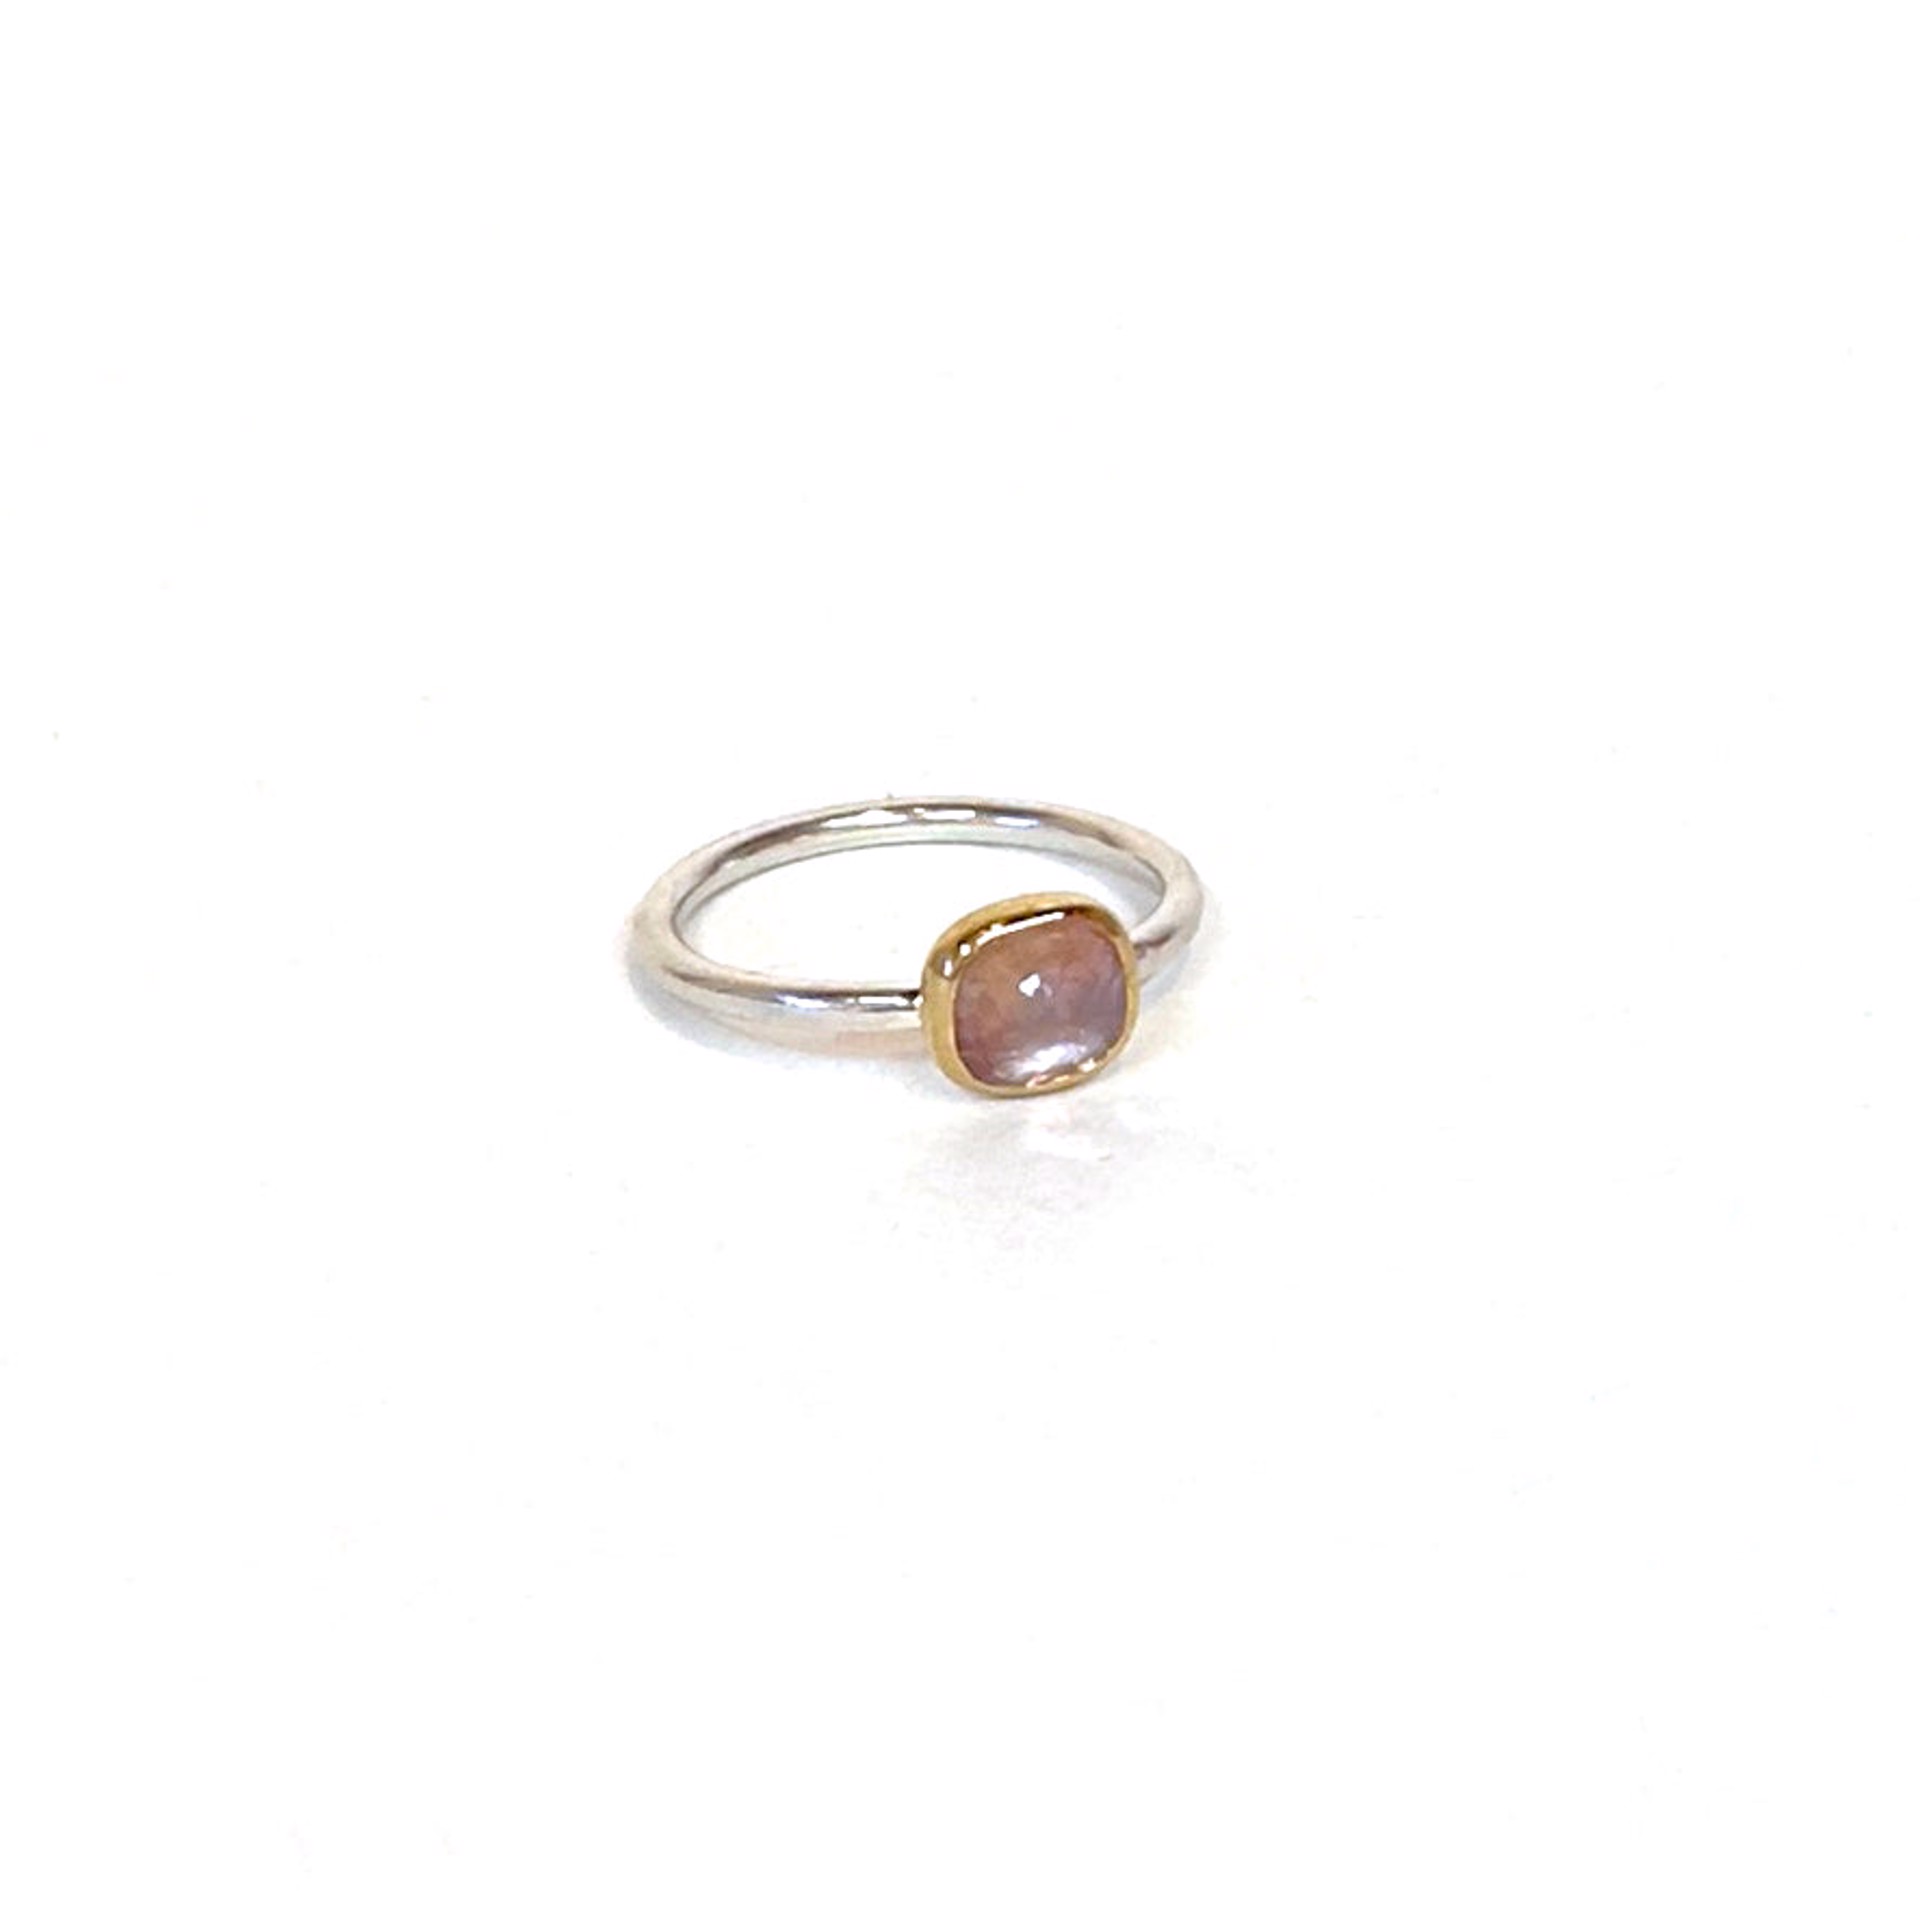 Peach Sapphire Ring with 18k gold by Sara Thompson